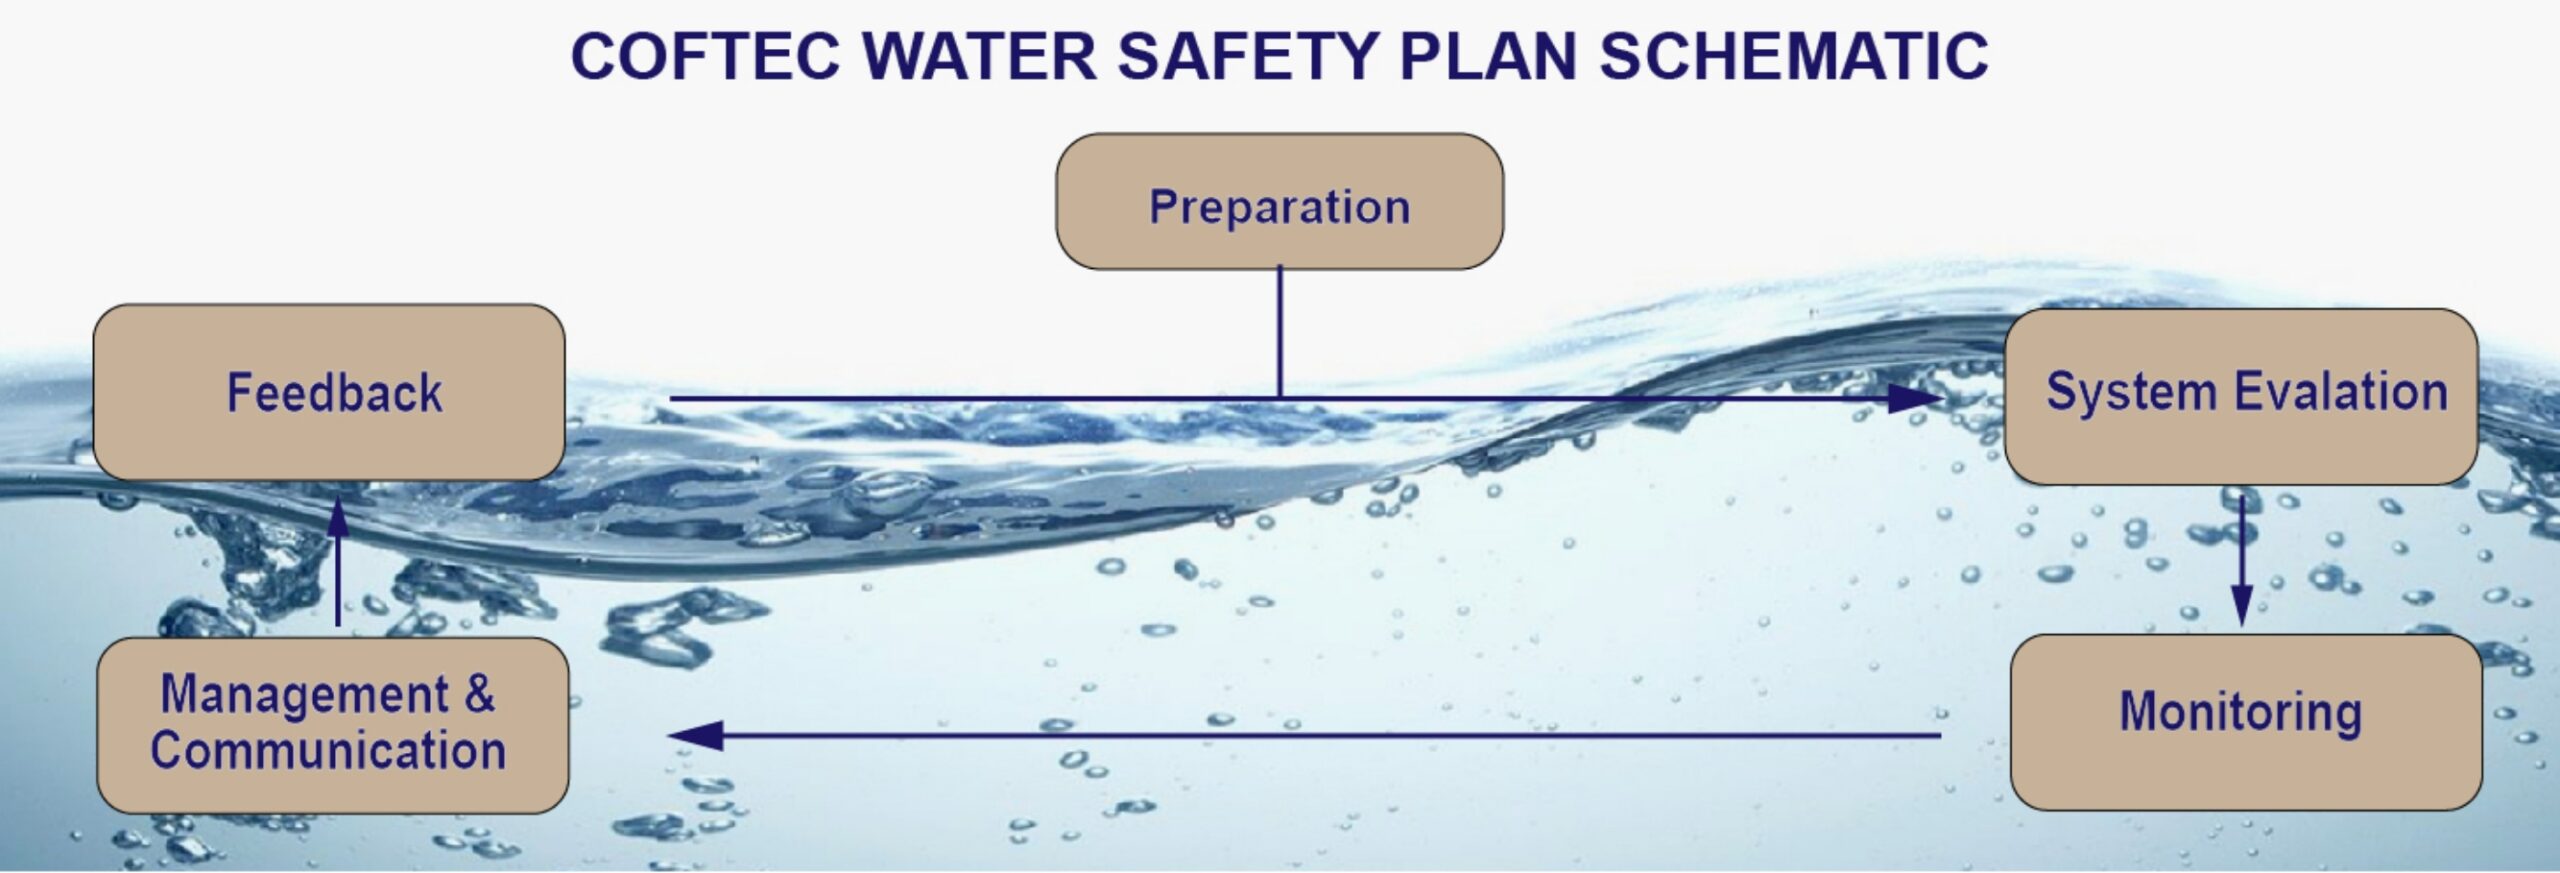 Coftec is a trusted provider of water safety plans for industrial and municipal water and wastewater streams.